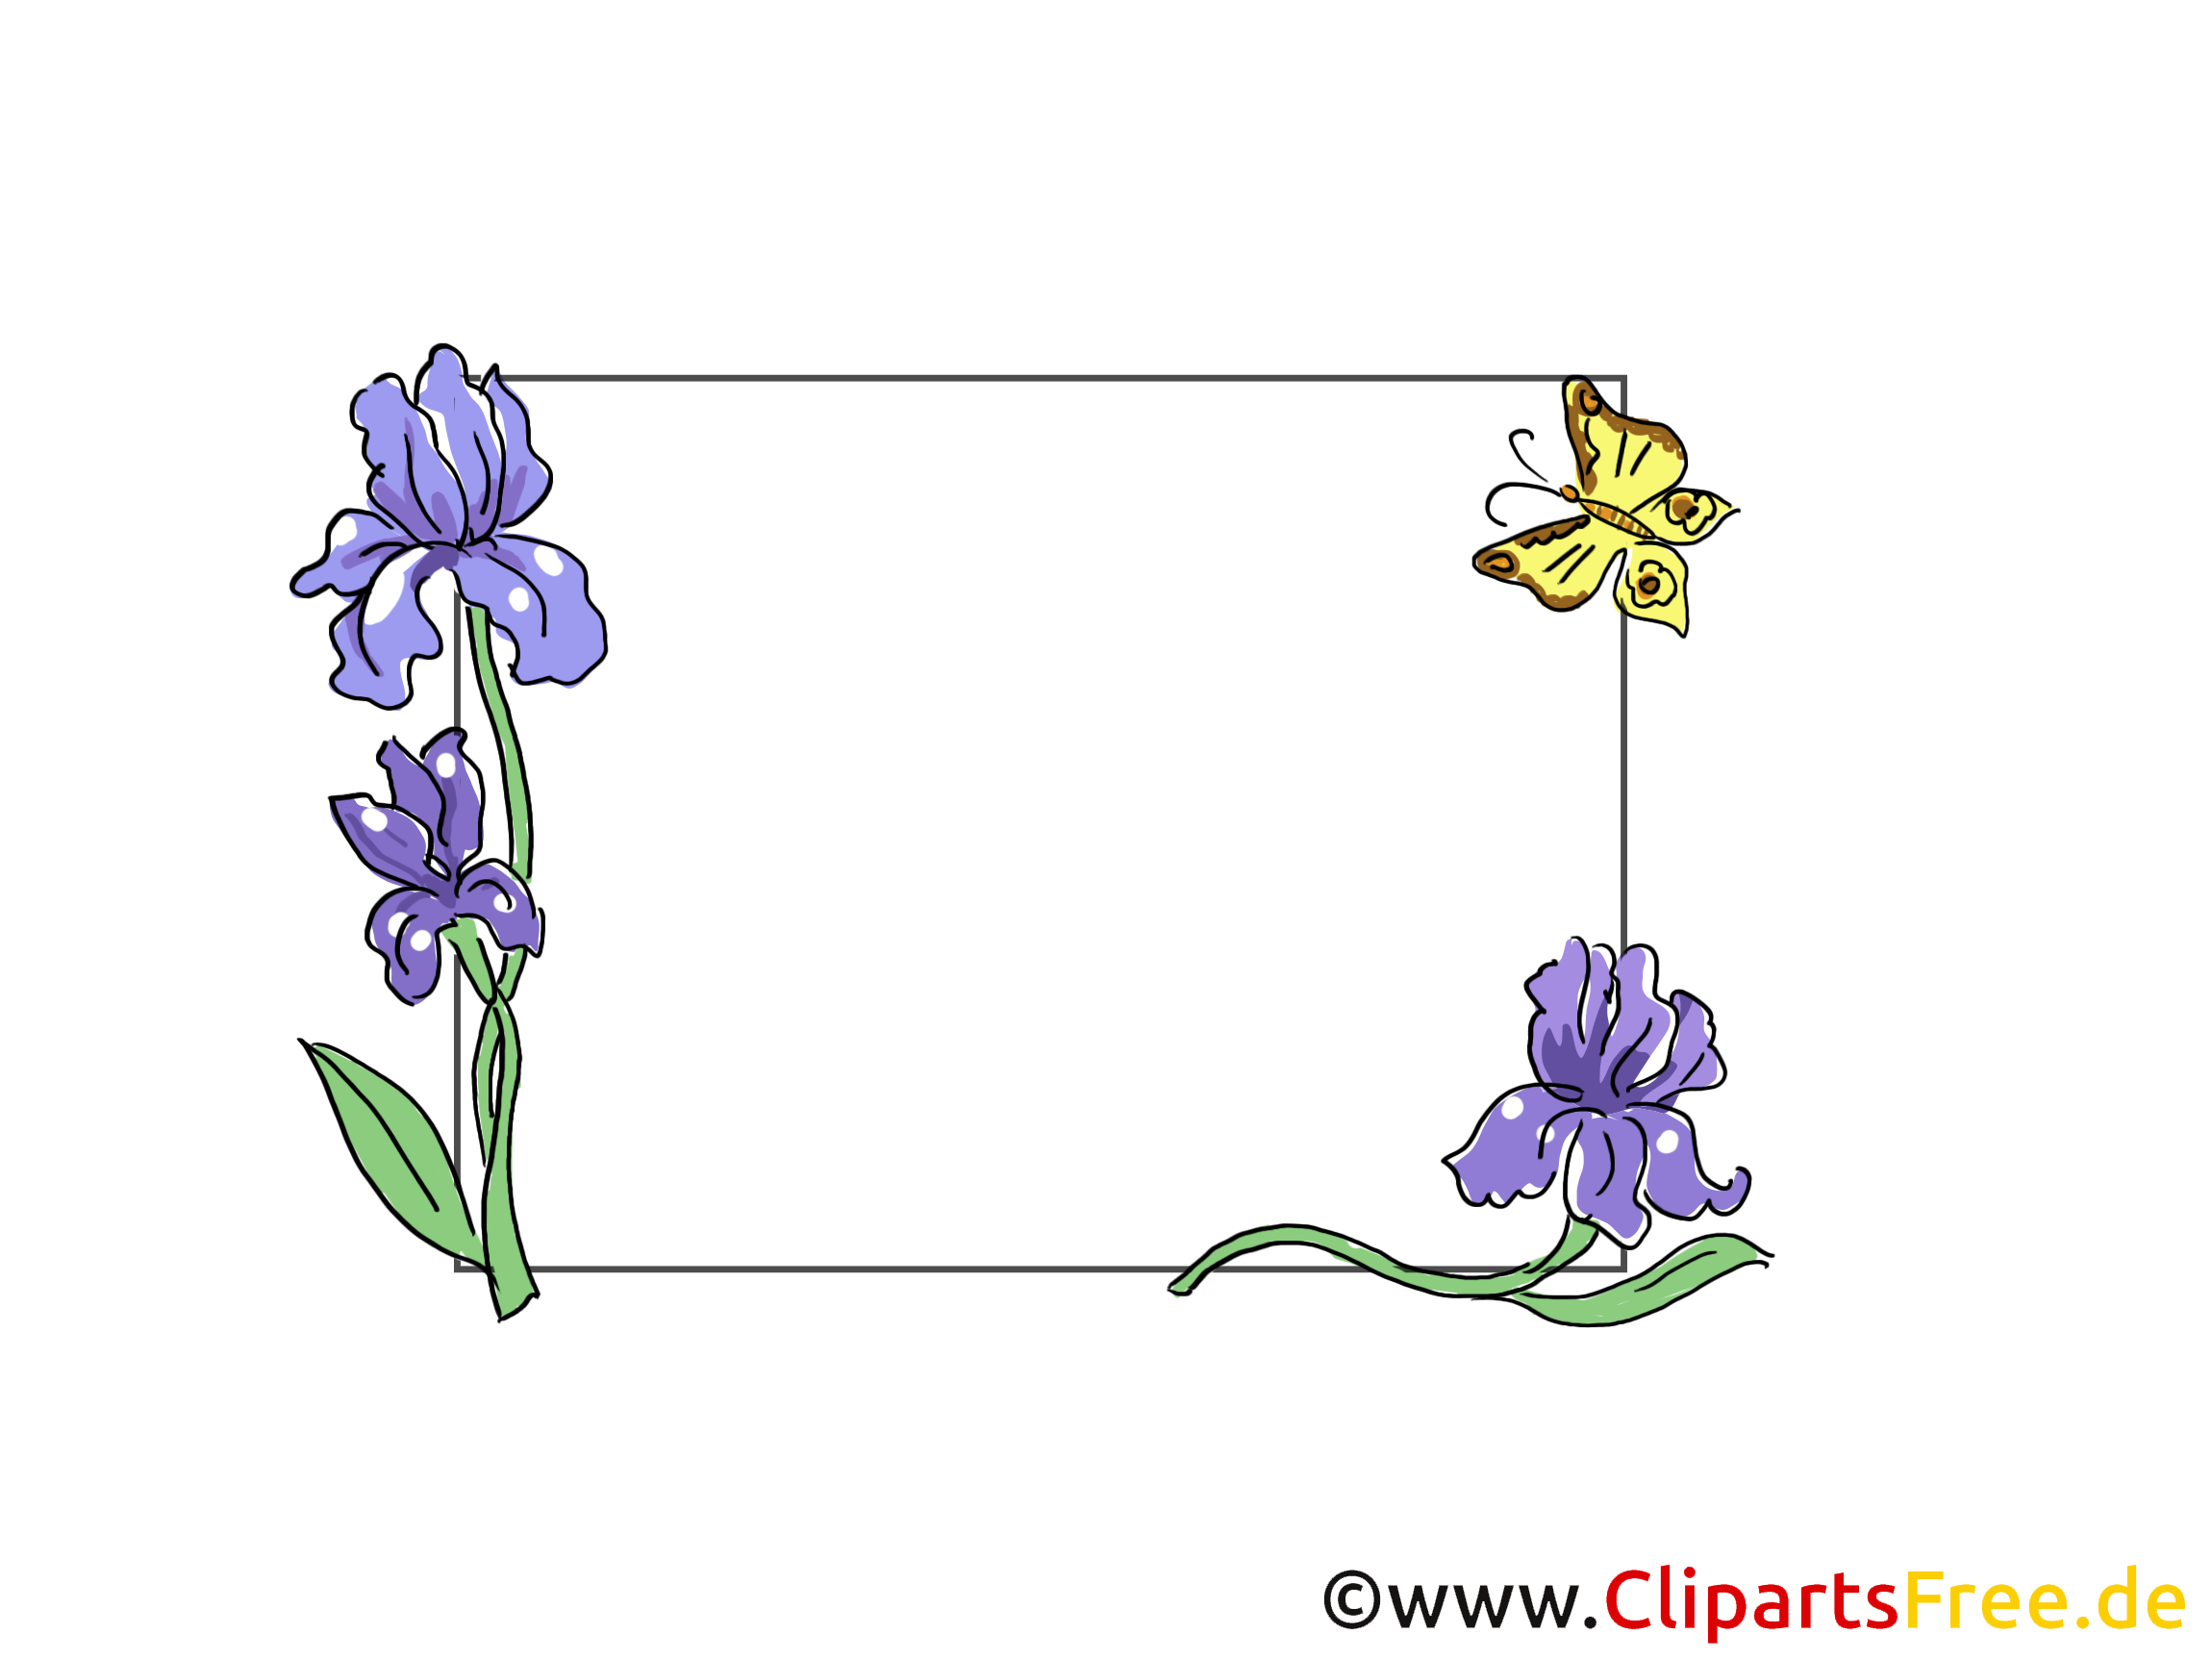 galerie clipart openoffice - photo #31